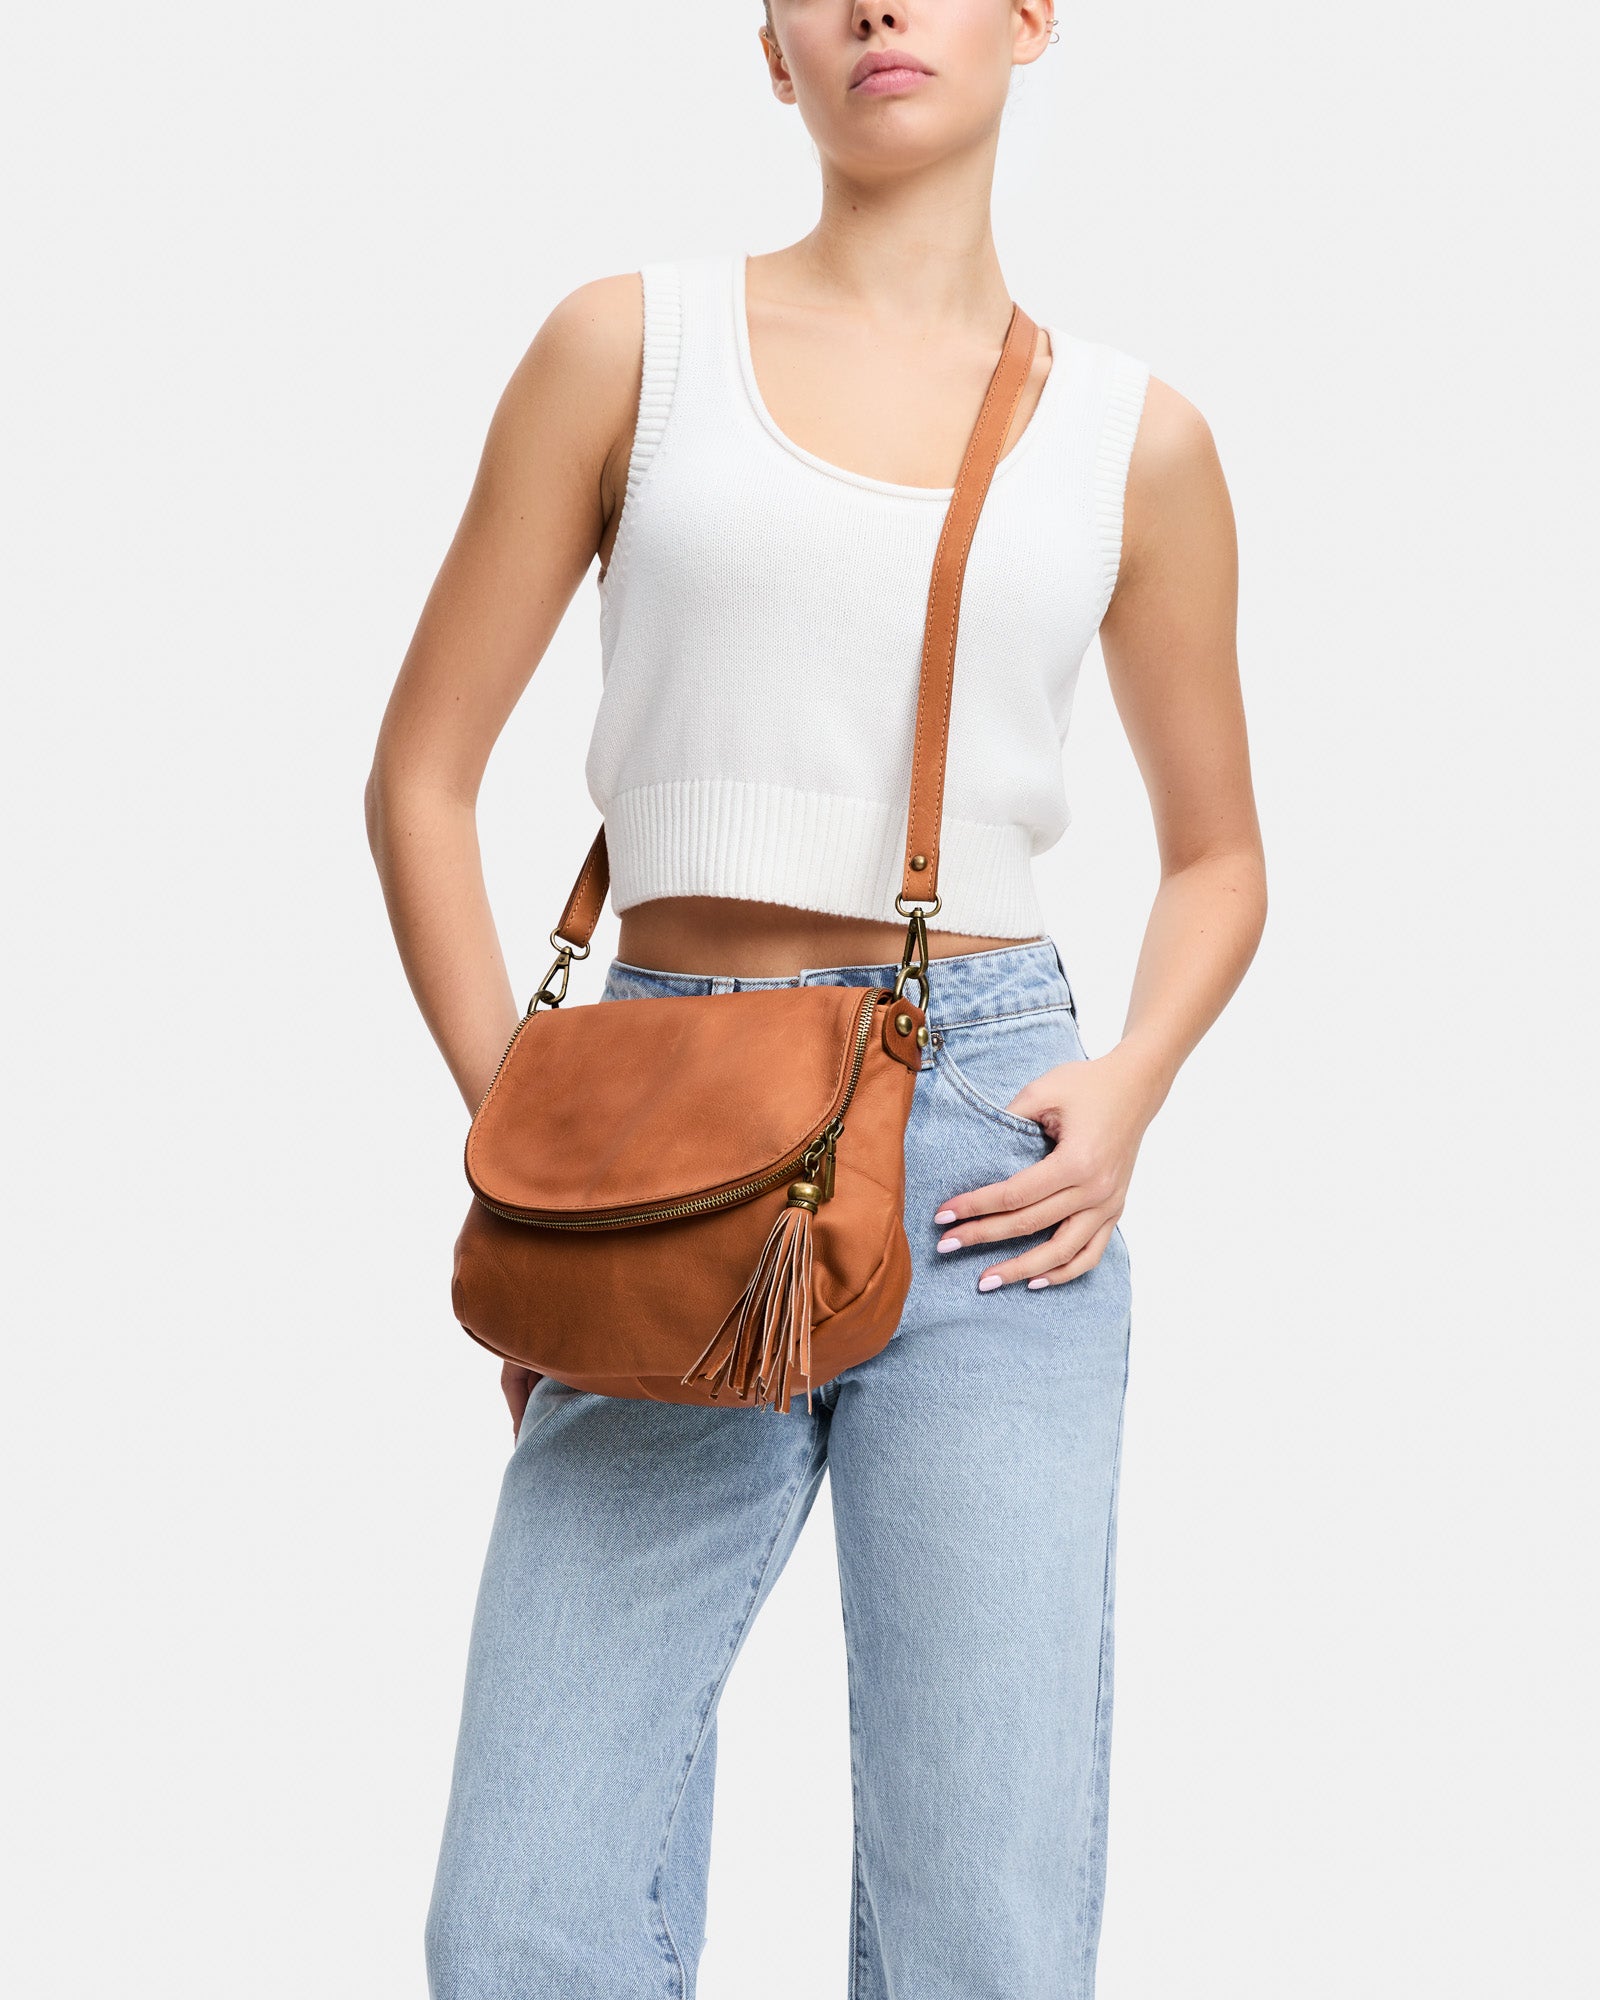 Full Grain Leather Saddle Bag Small Cross Body Bag With 